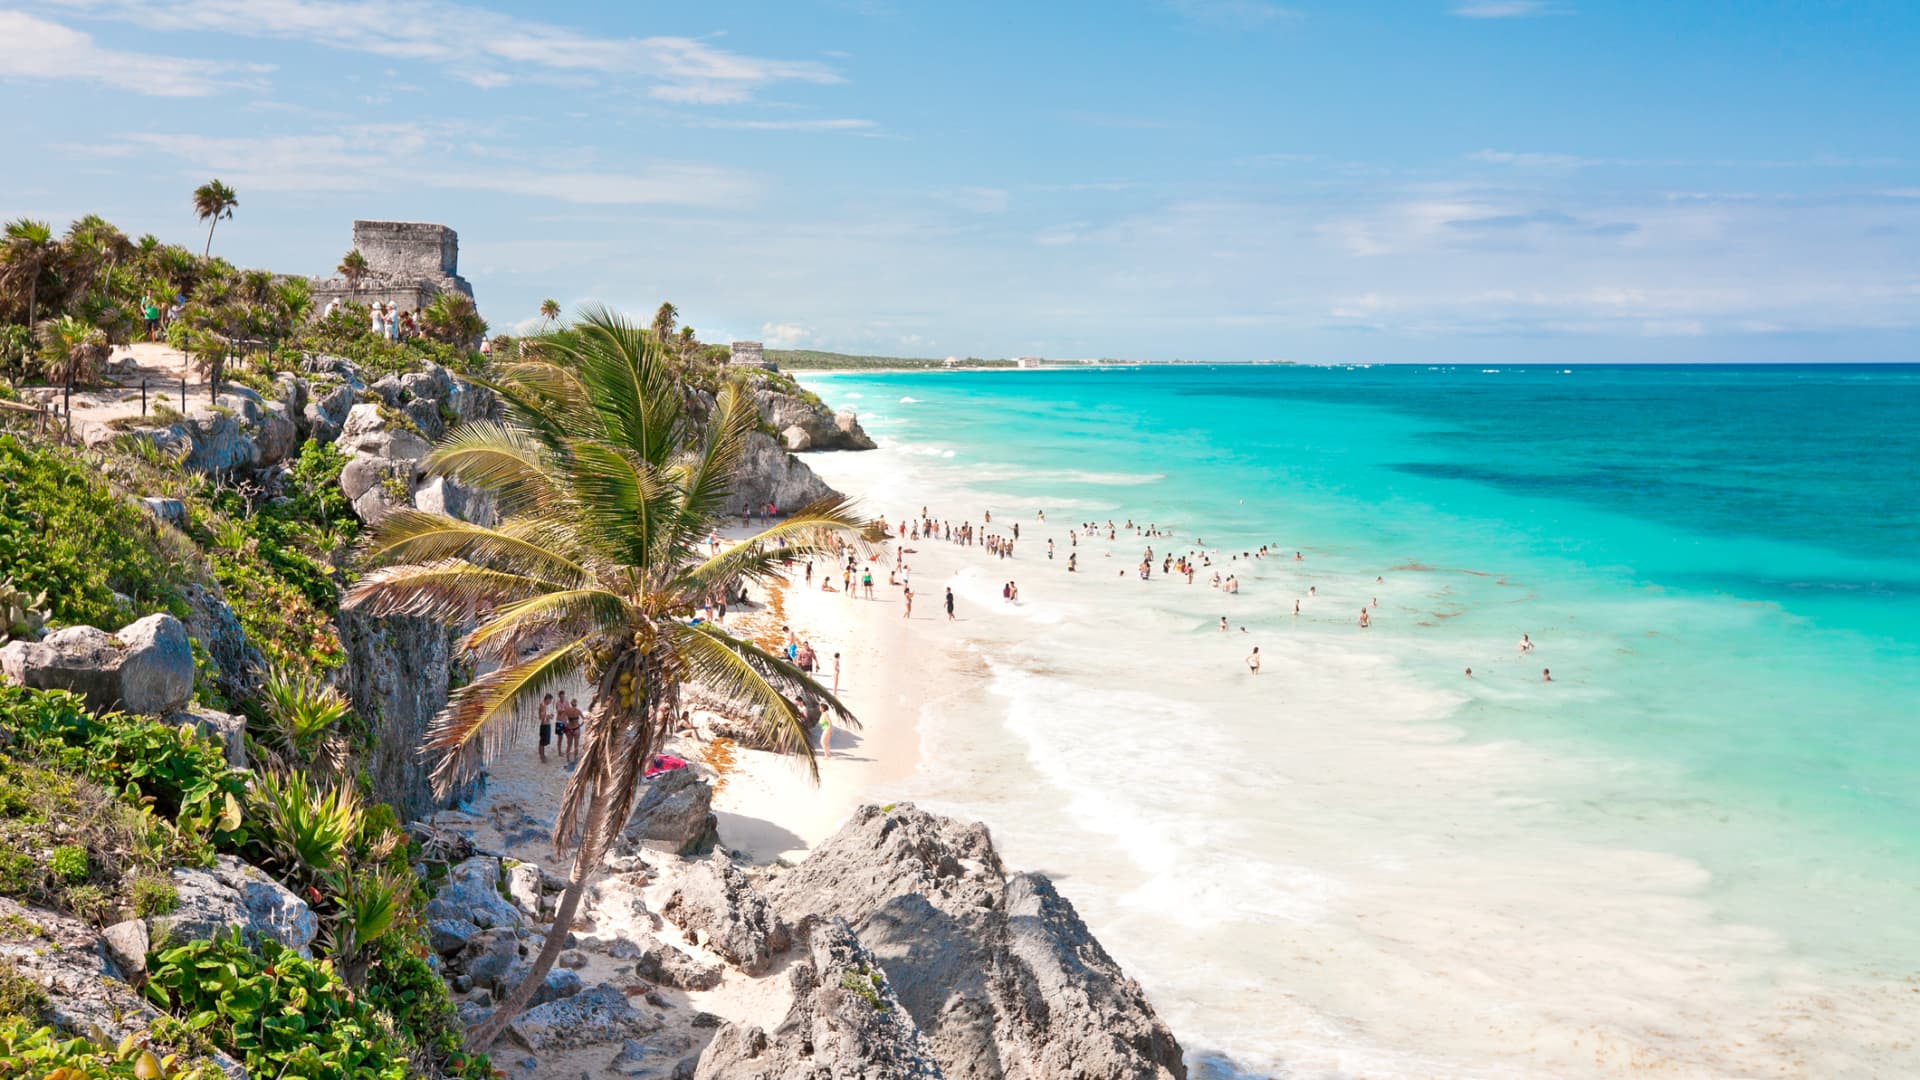 Beach and mountain destinations are popular, with bookings rising 1,665% to Tulum, Mexico (seen here) and nearly 700% to Denali National Park from 2019 to 2021, according to Viator.